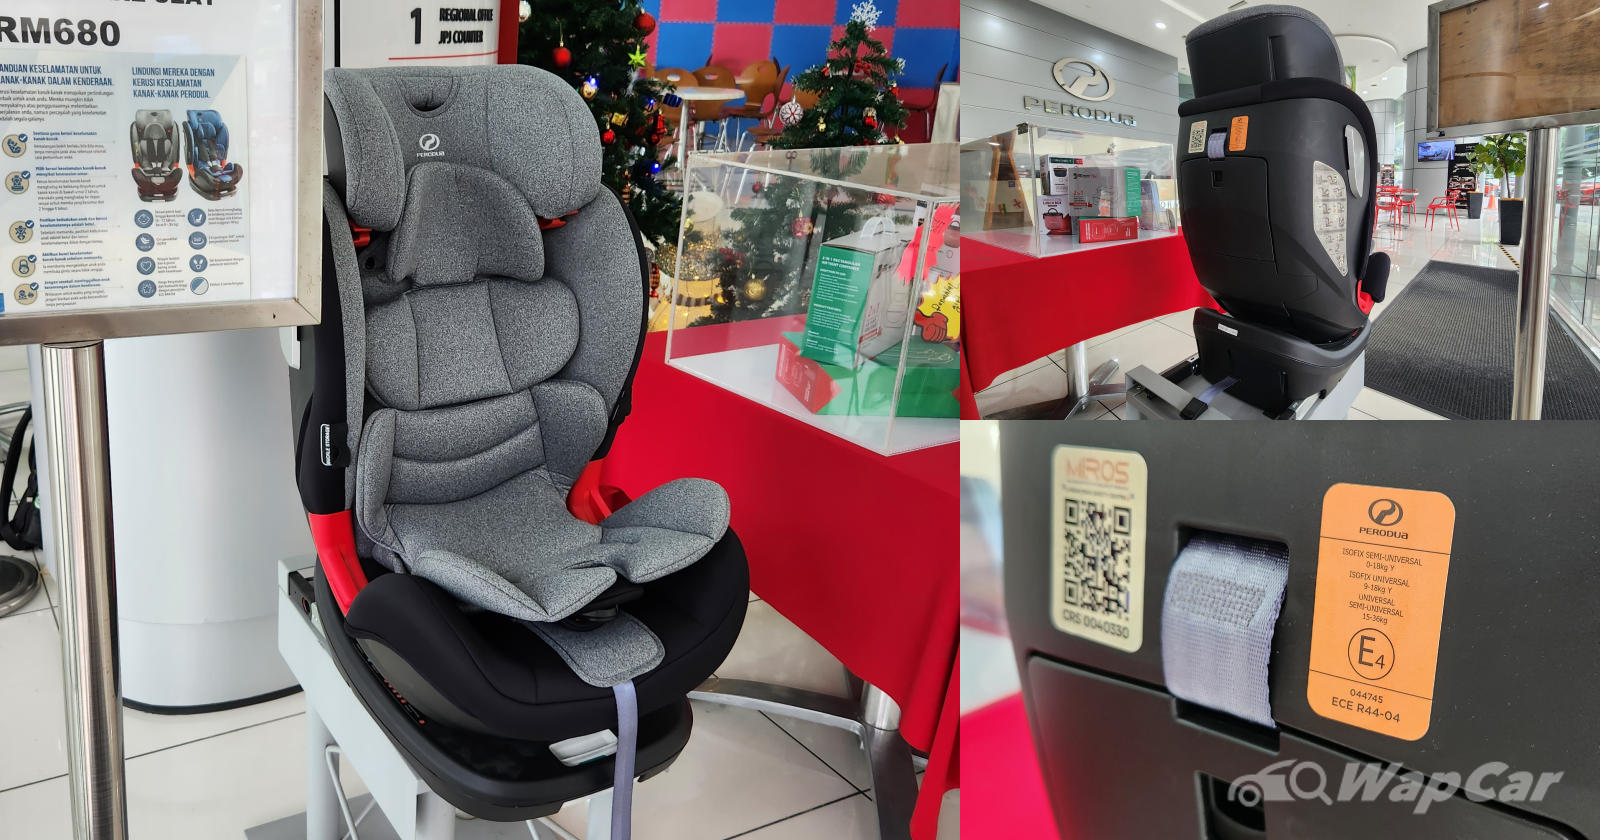 Driving home this CNY? Strap your child in a Perodua Care Seat at only RM 680 02